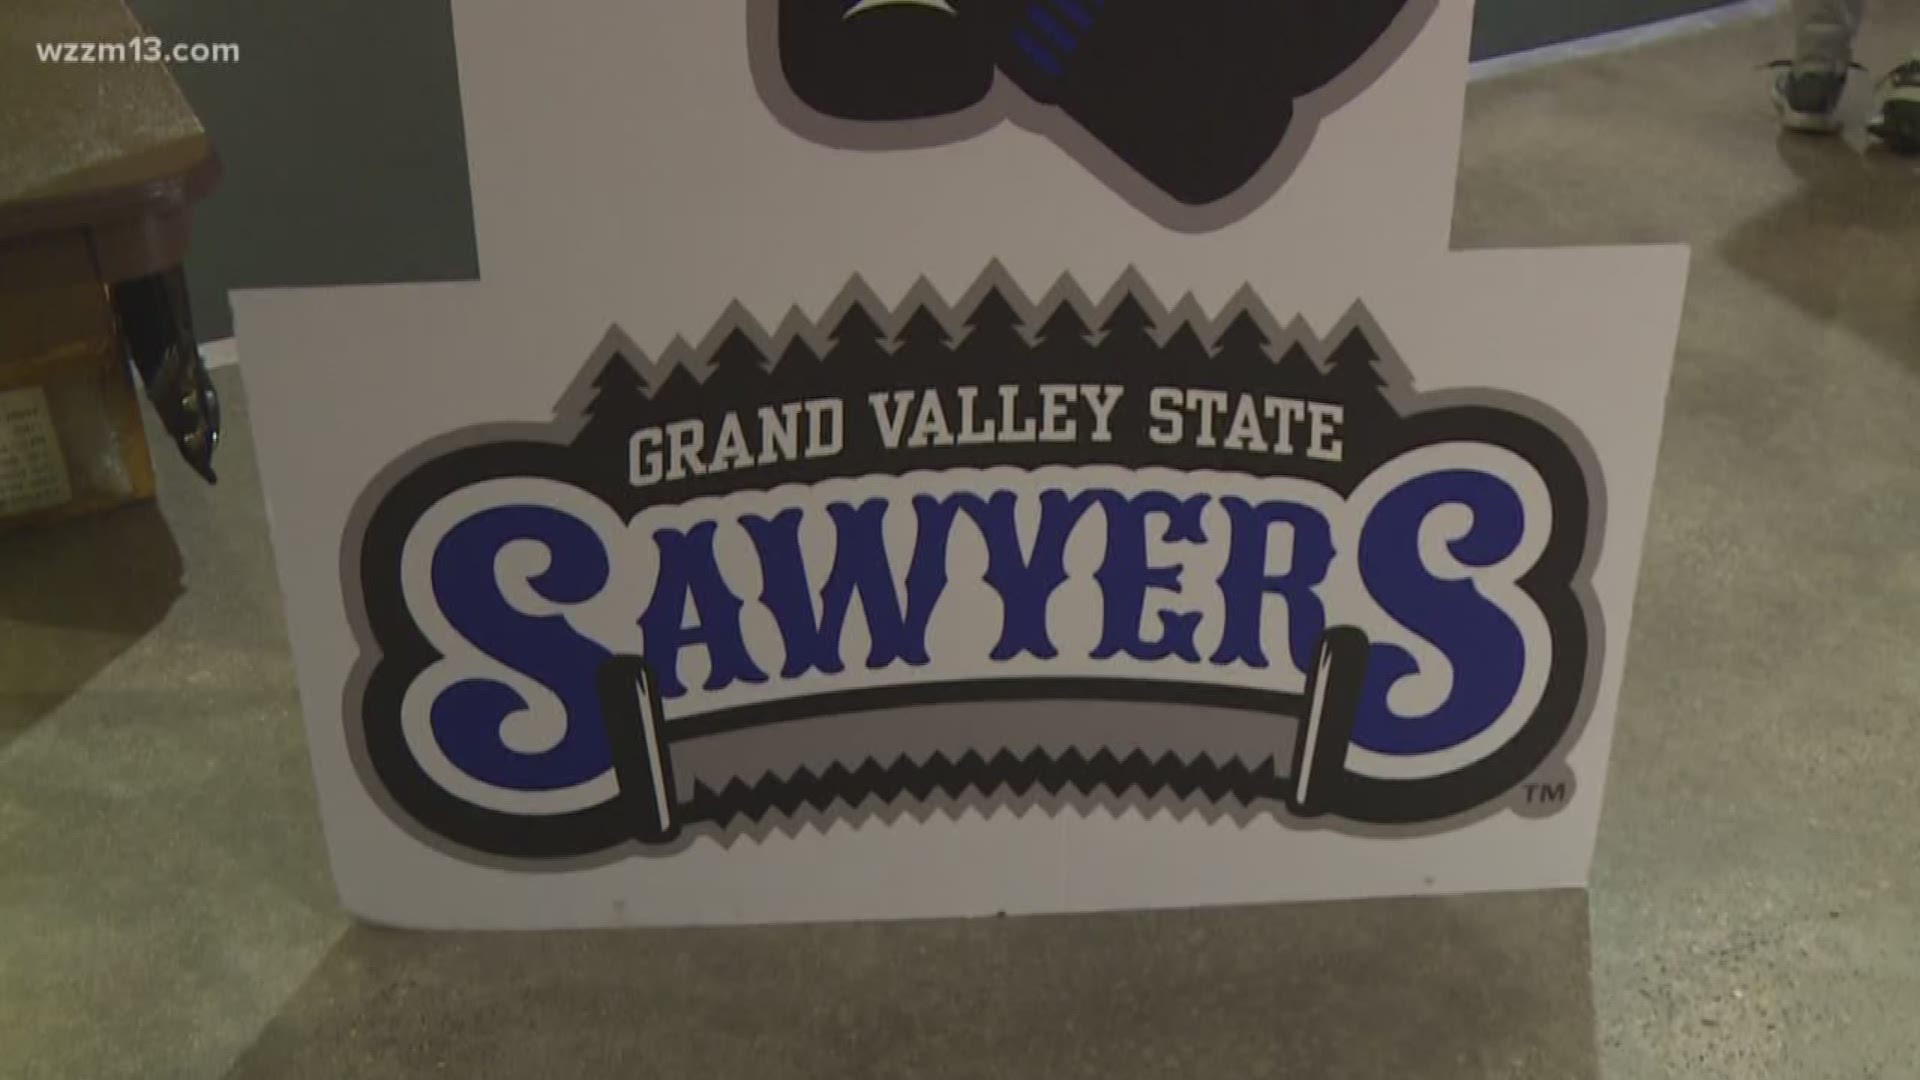 Grand Valley State University changes mascot to Sawyers for one game